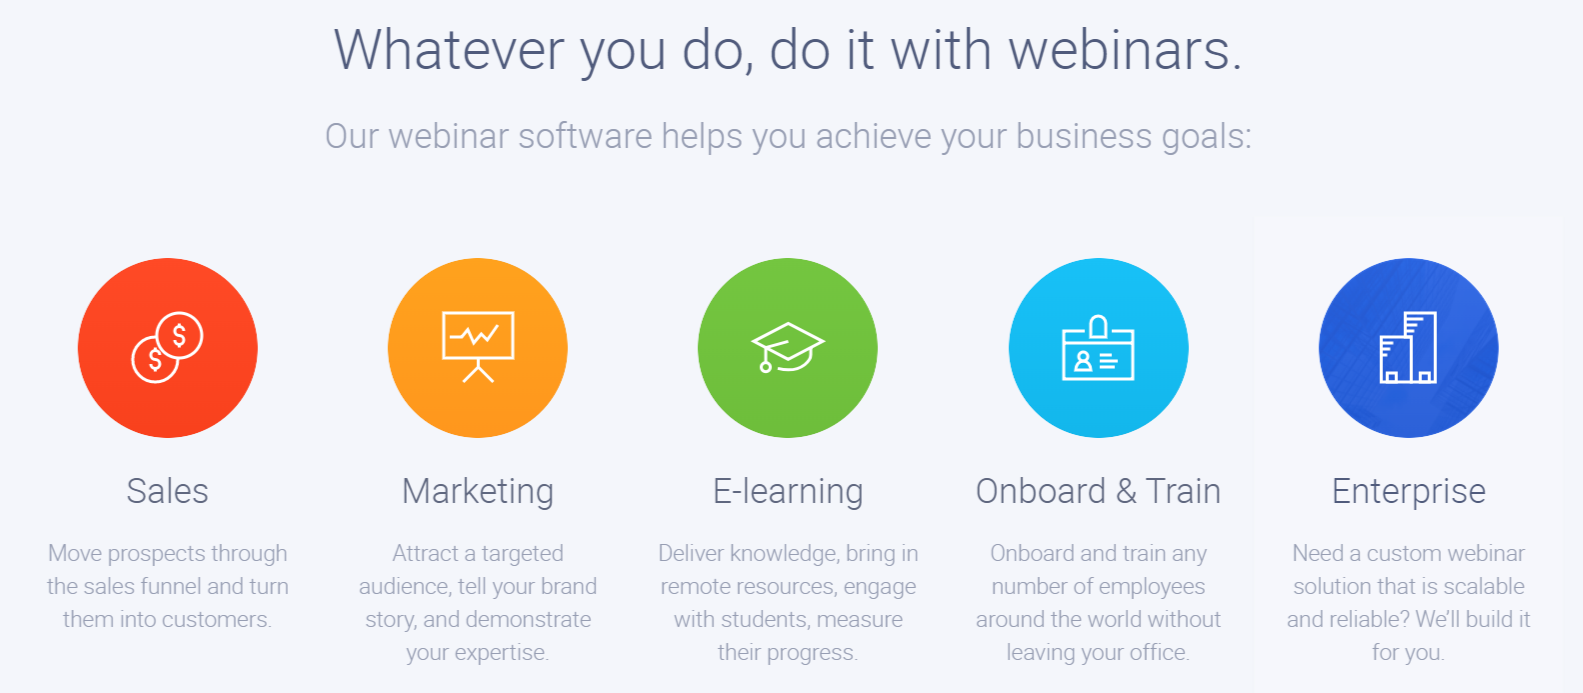 ClickMeeting Review- Who Can Use Webianr Service